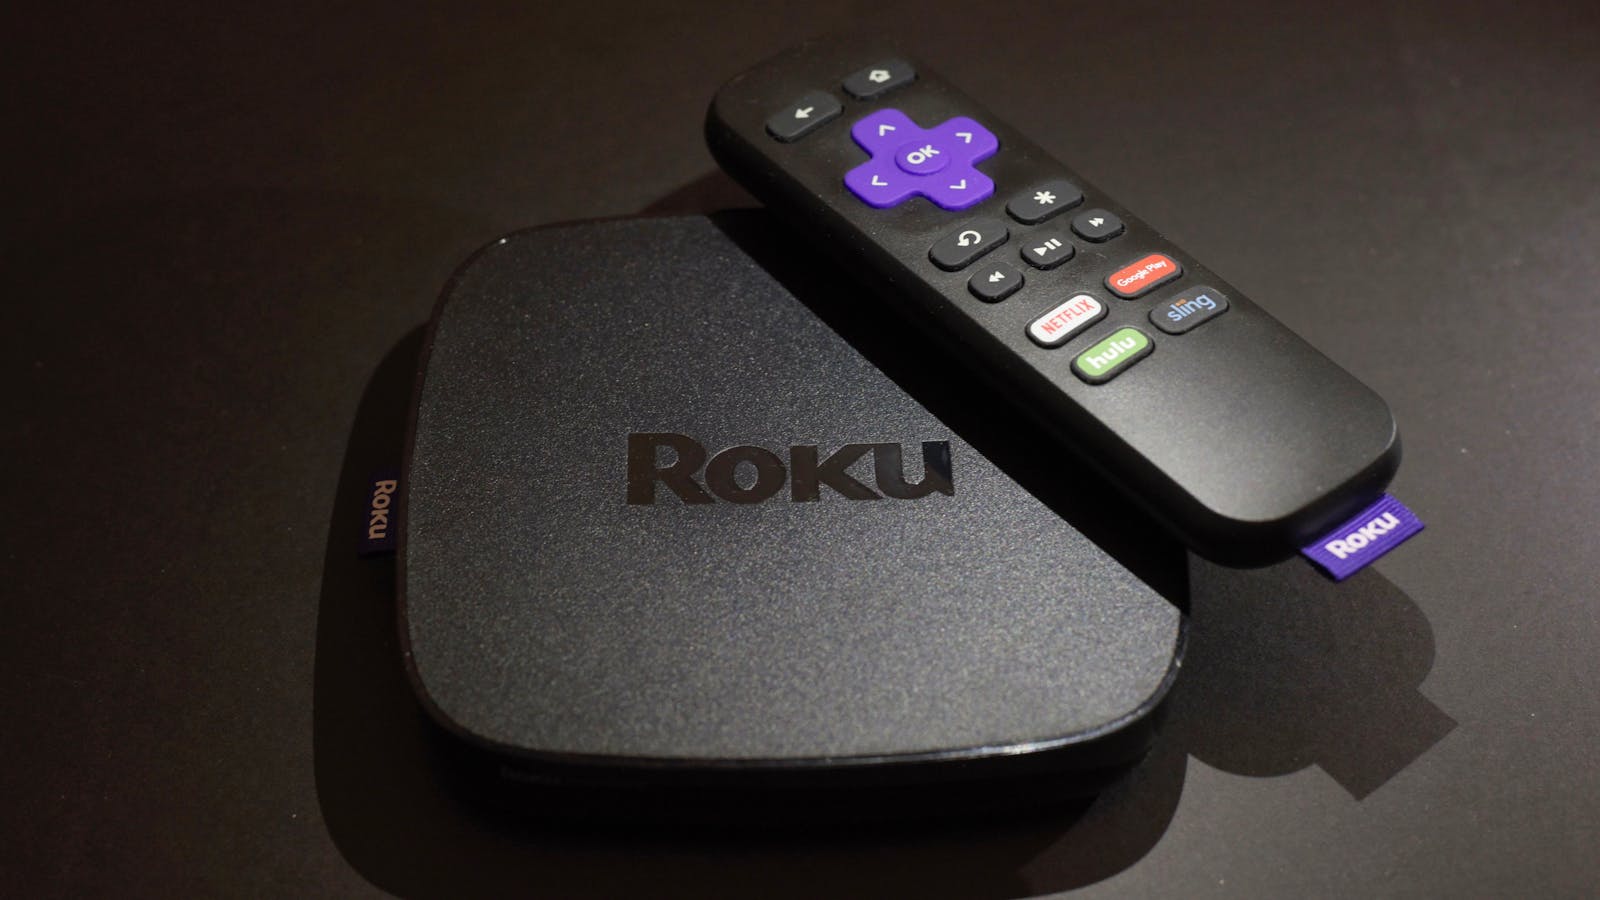 A Roku streaming device and remote control. Photo by AP